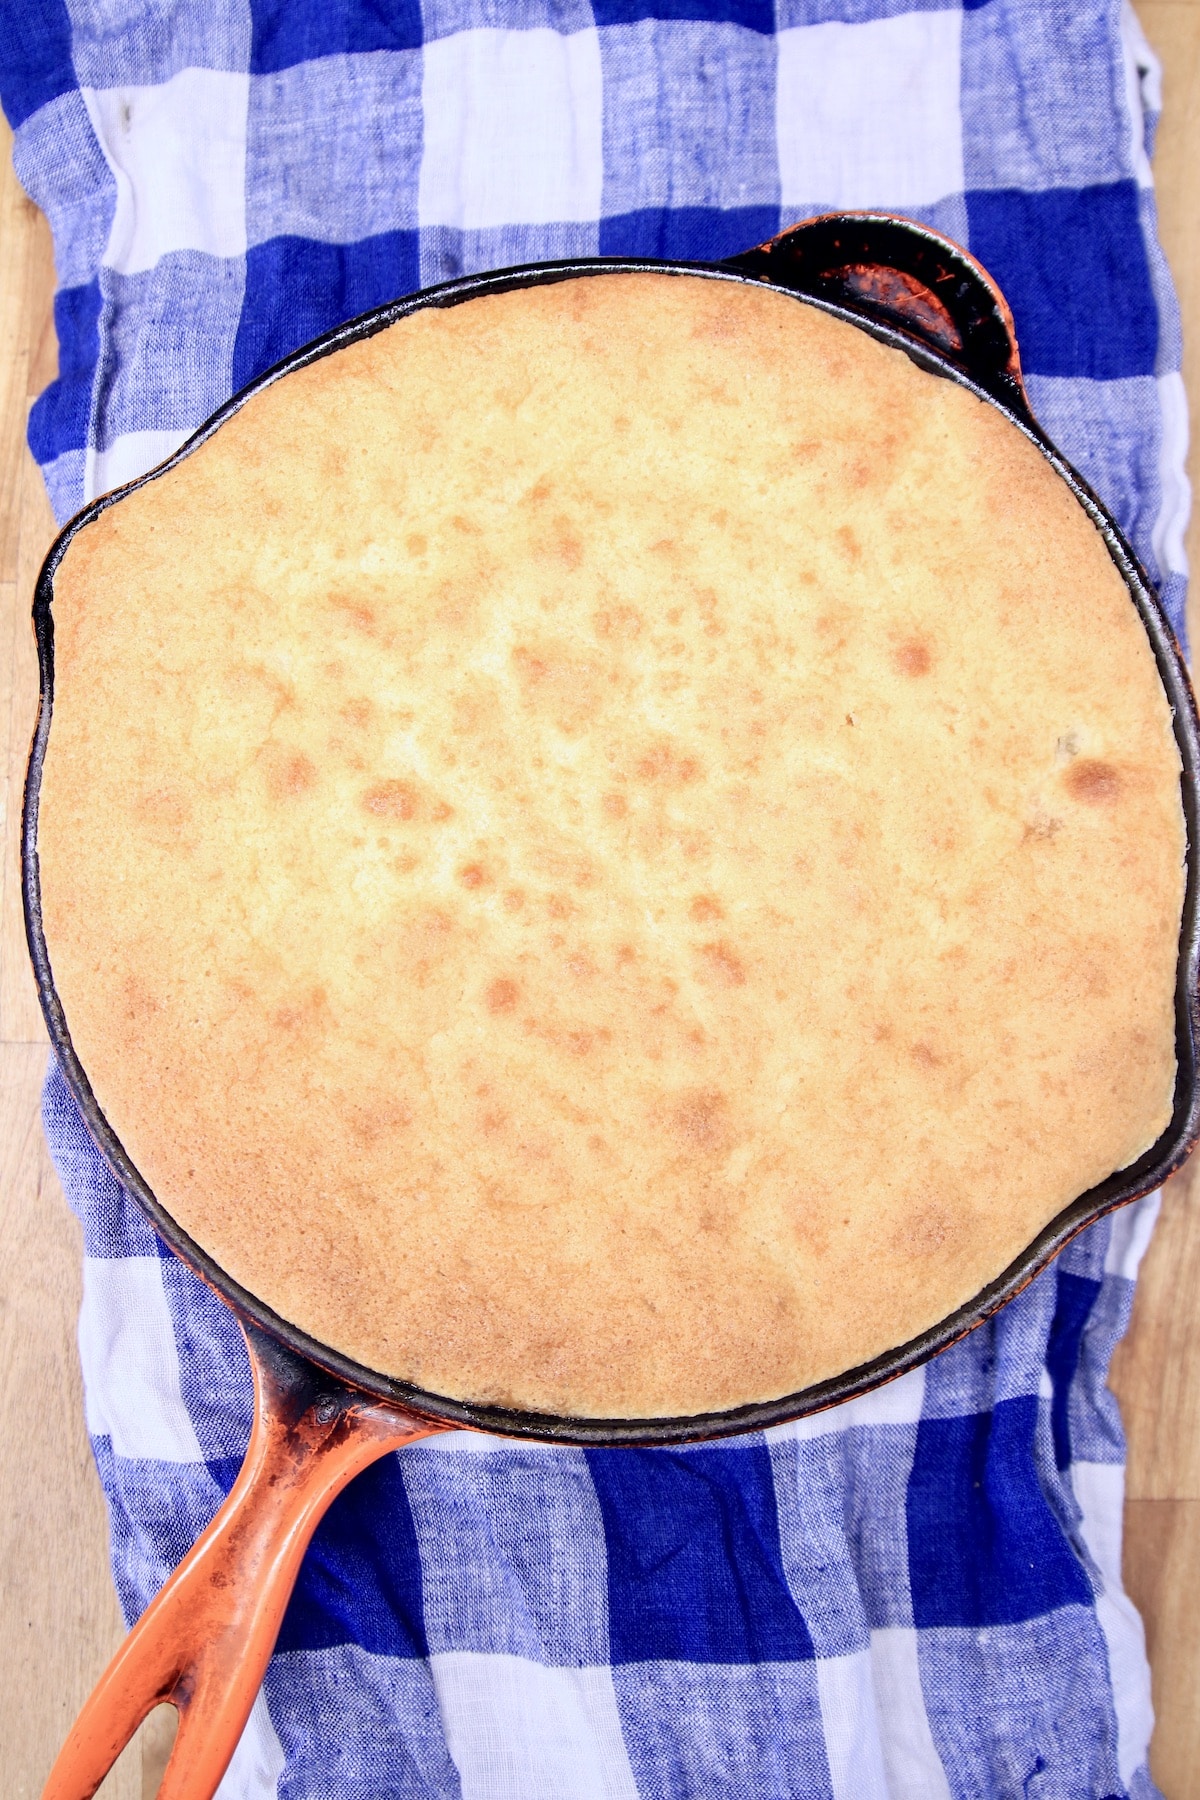 Skillet with baked cake on a blue and white checked cloth.